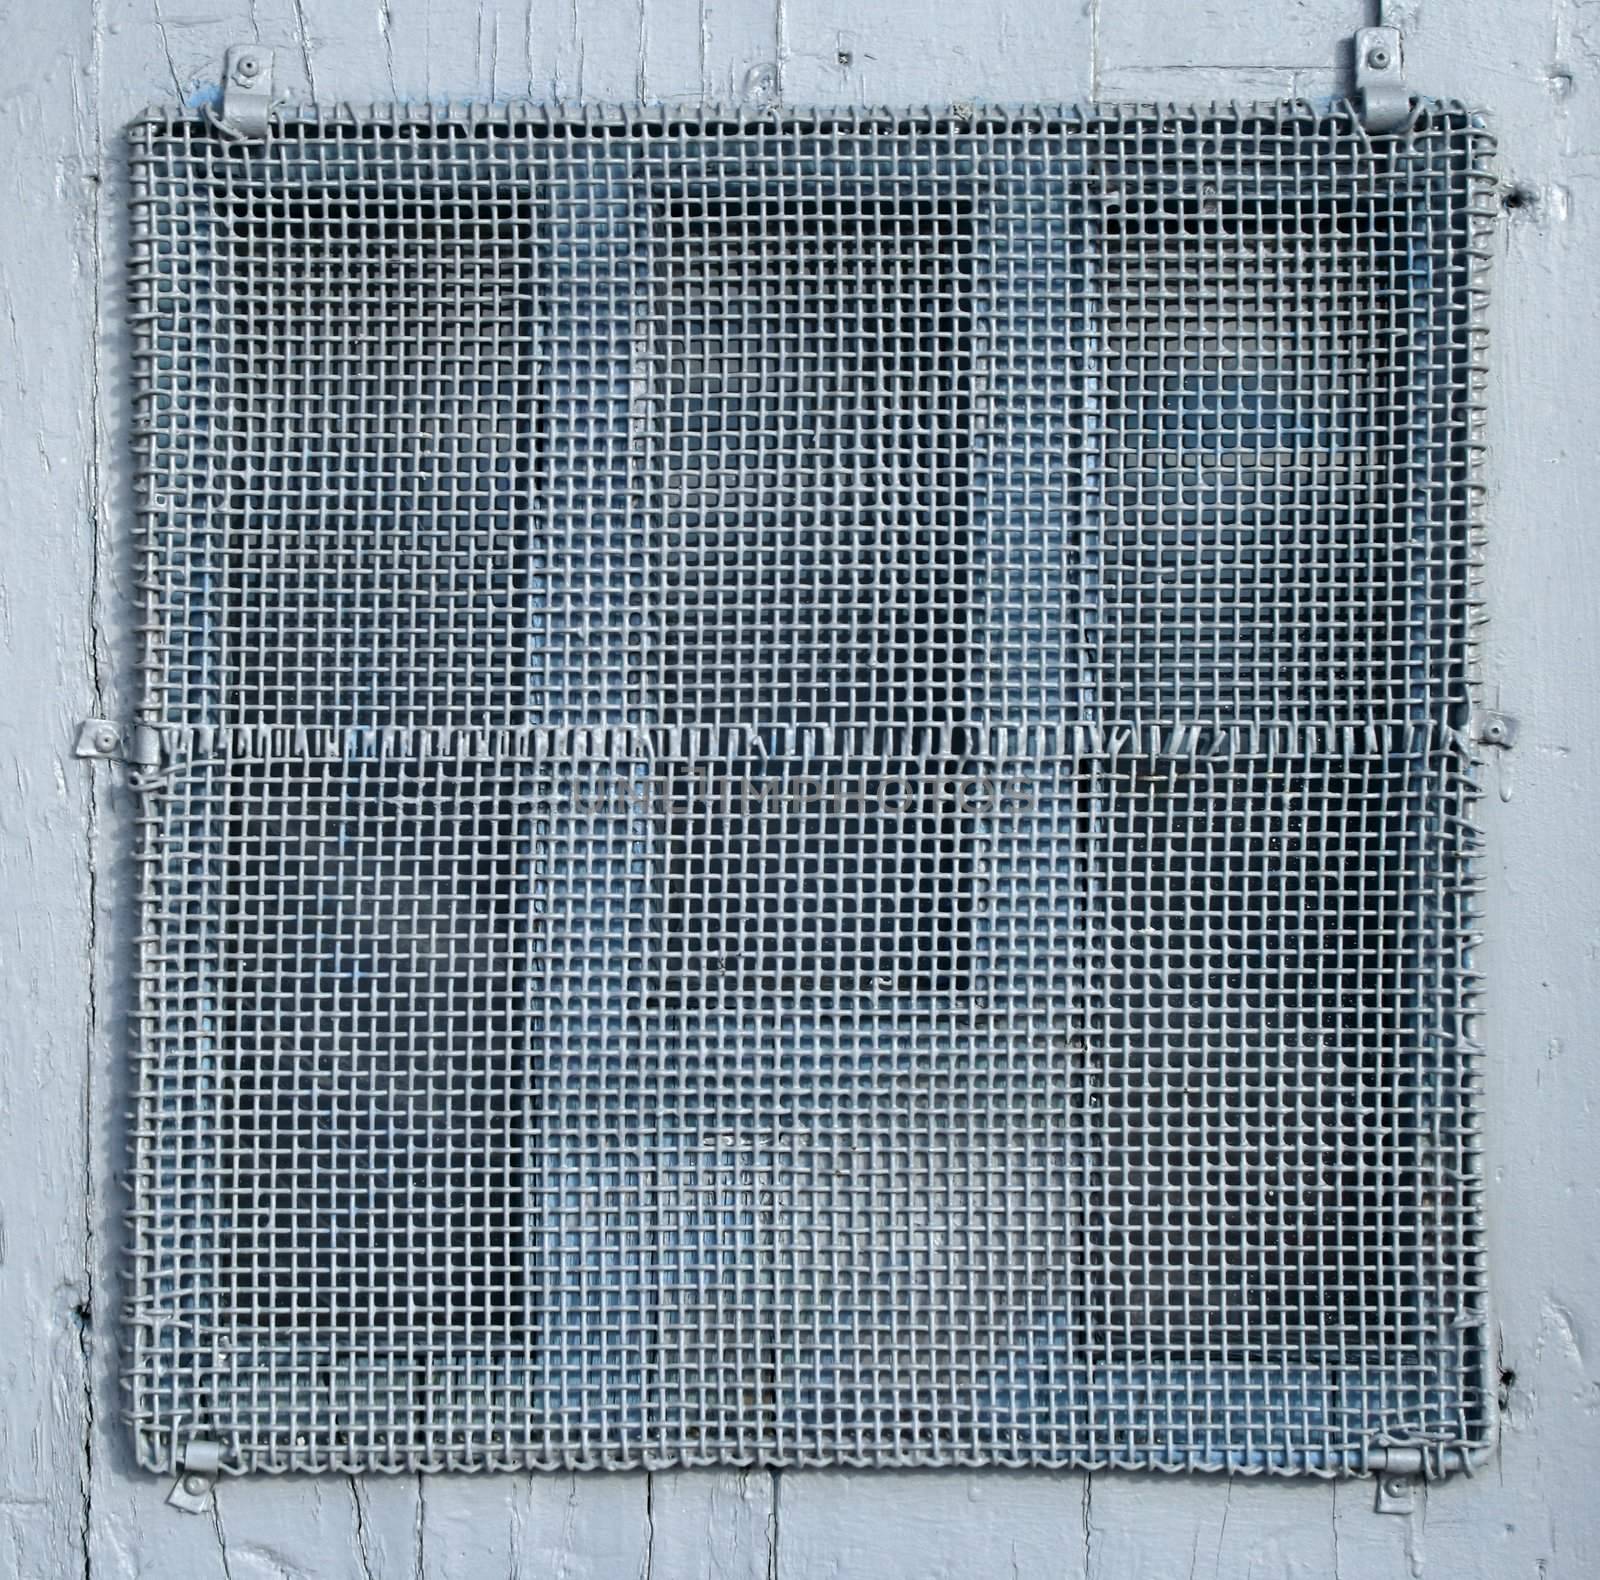 Painted wire mesh covering the window of the old door.